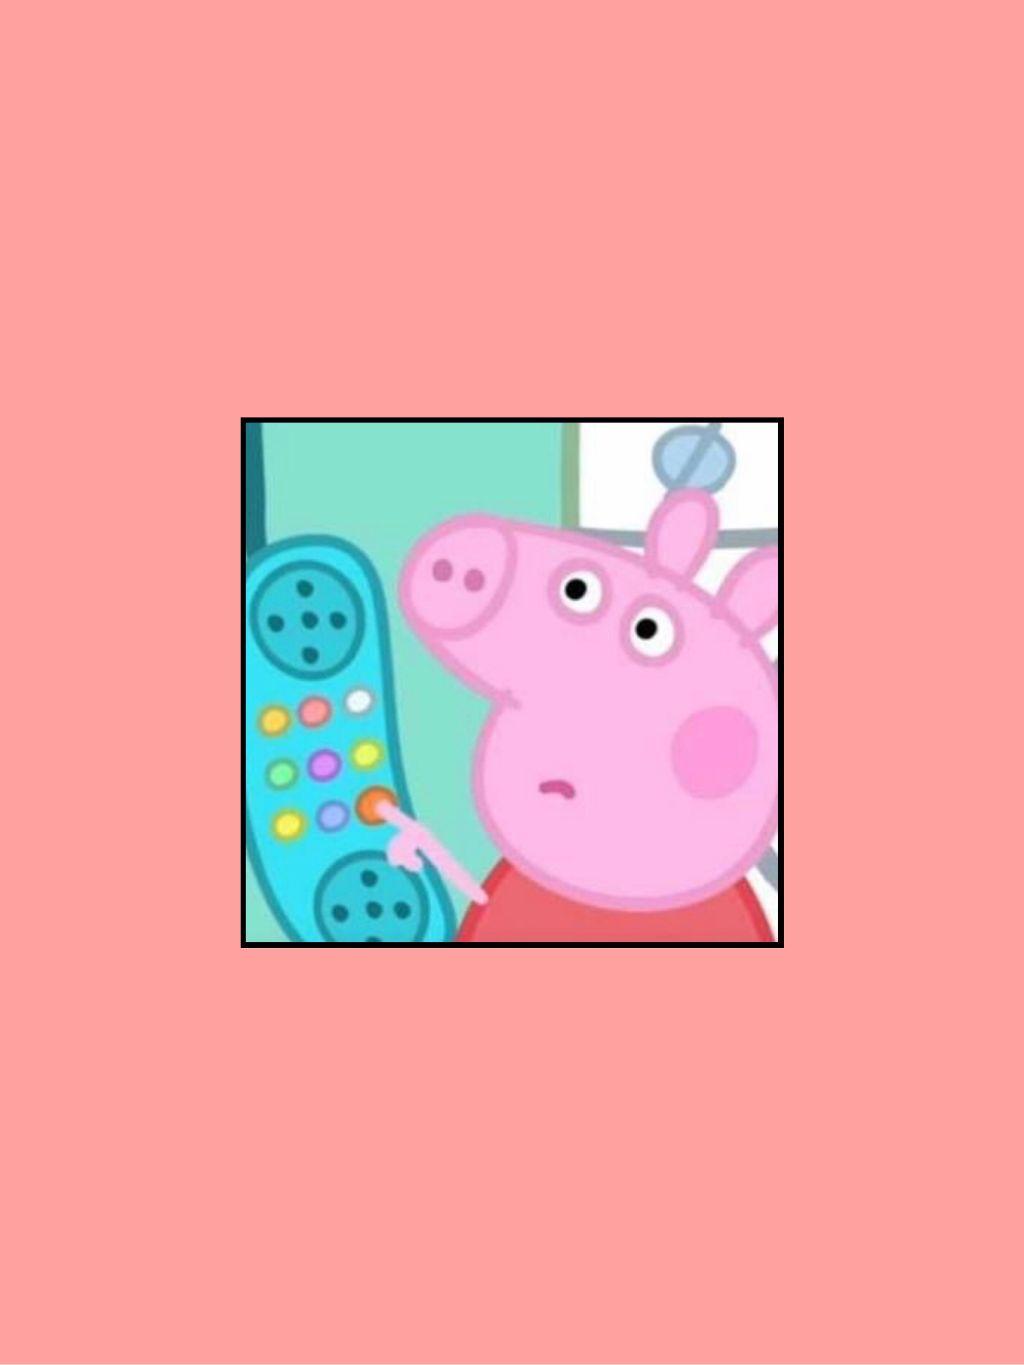 Peppa- what are you doing on my iphone wallpaper? ••••♥